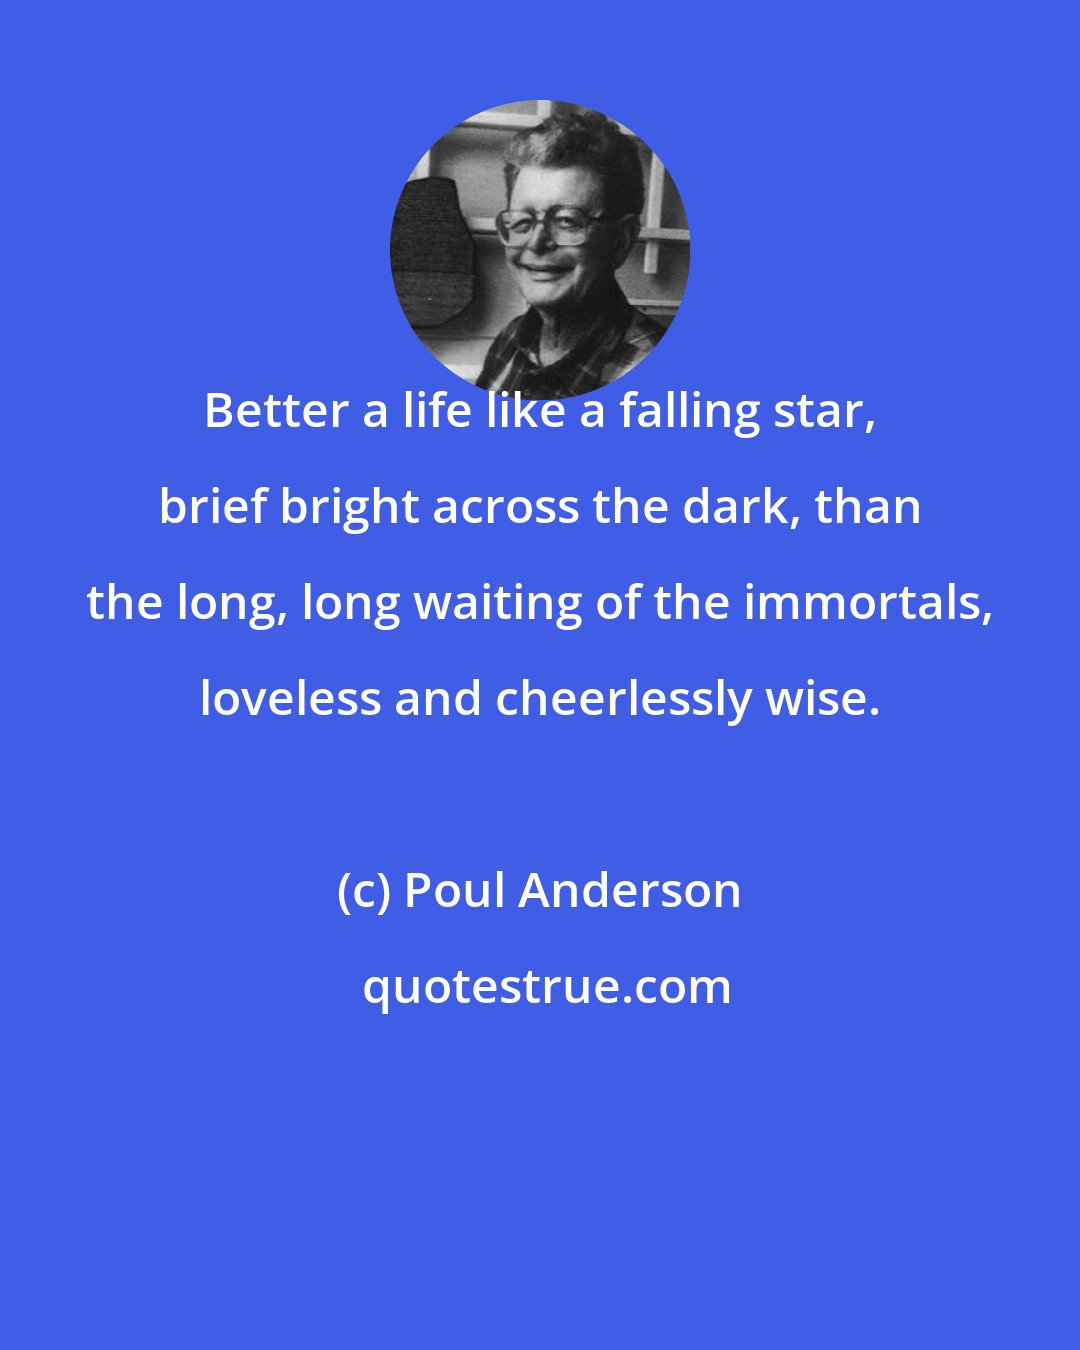 Poul Anderson: Better a life like a falling star, brief bright across the dark, than the long, long waiting of the immortals, loveless and cheerlessly wise.